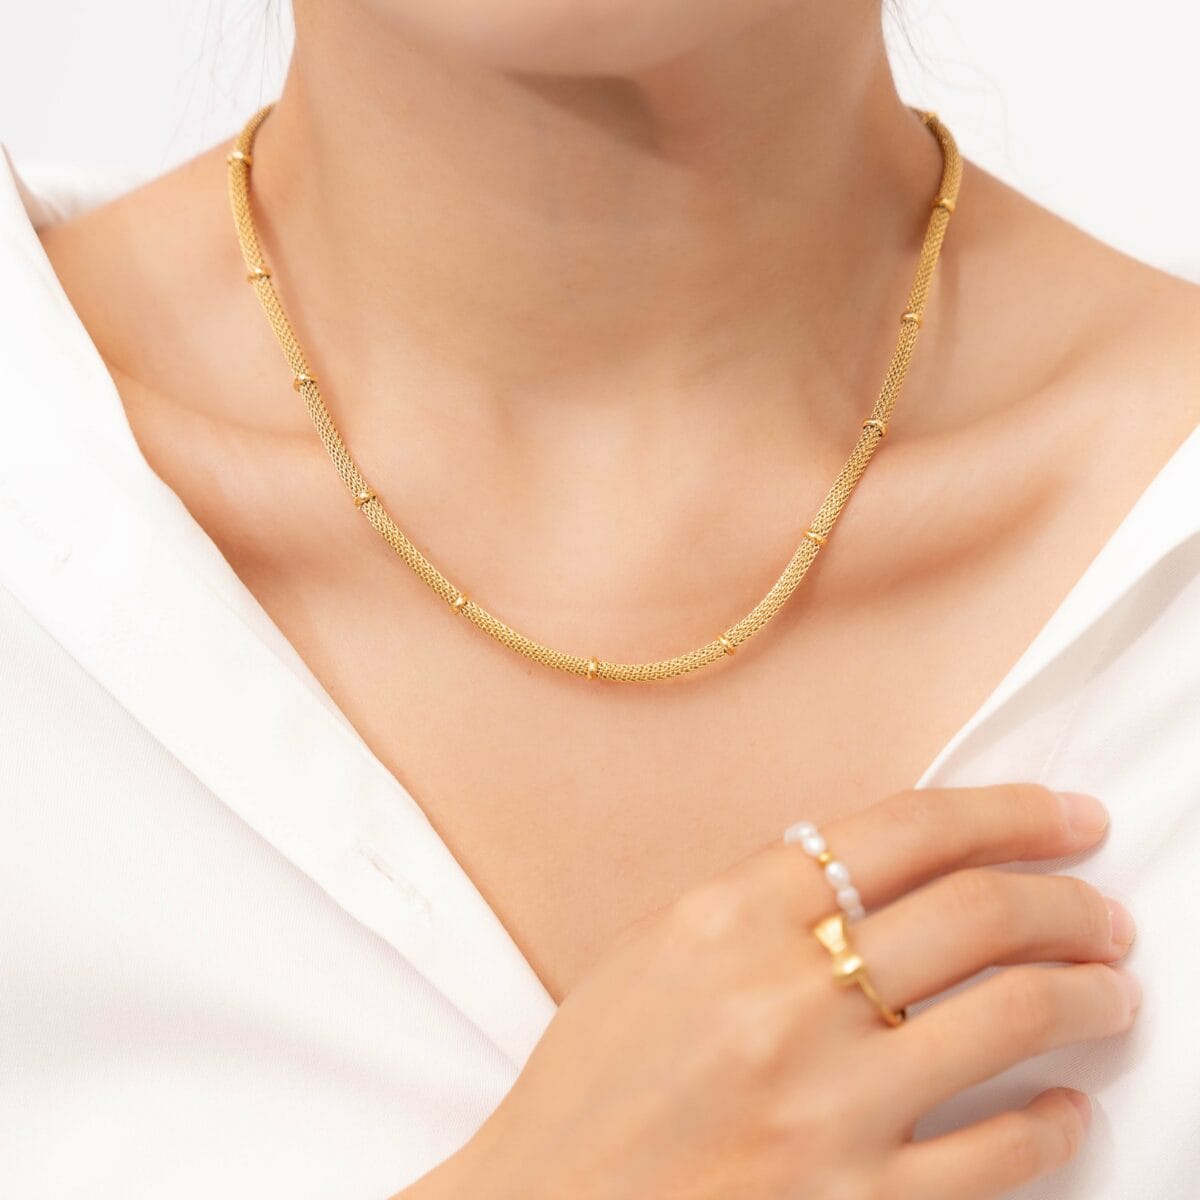 https://m.clubbella.co/product/bold-gold-chain-beaded-necklace/ Resized (79 of 134)